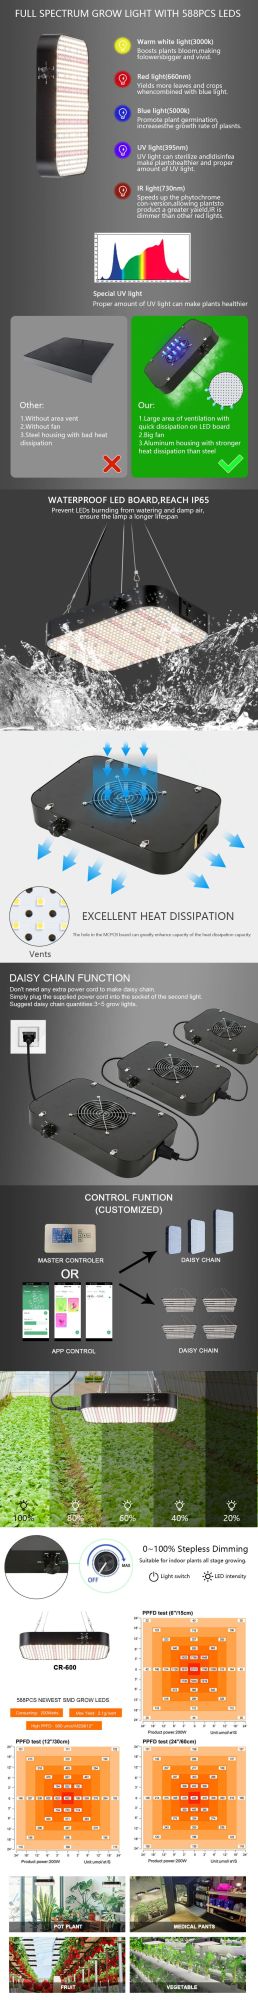 Newest Ideal Full Spectrum Plant Grow Lighting for 2X2 FT Coverage, Best Growing Lamps 200W with 588PCS LEDs & Daisy China Function & Strong Cool System